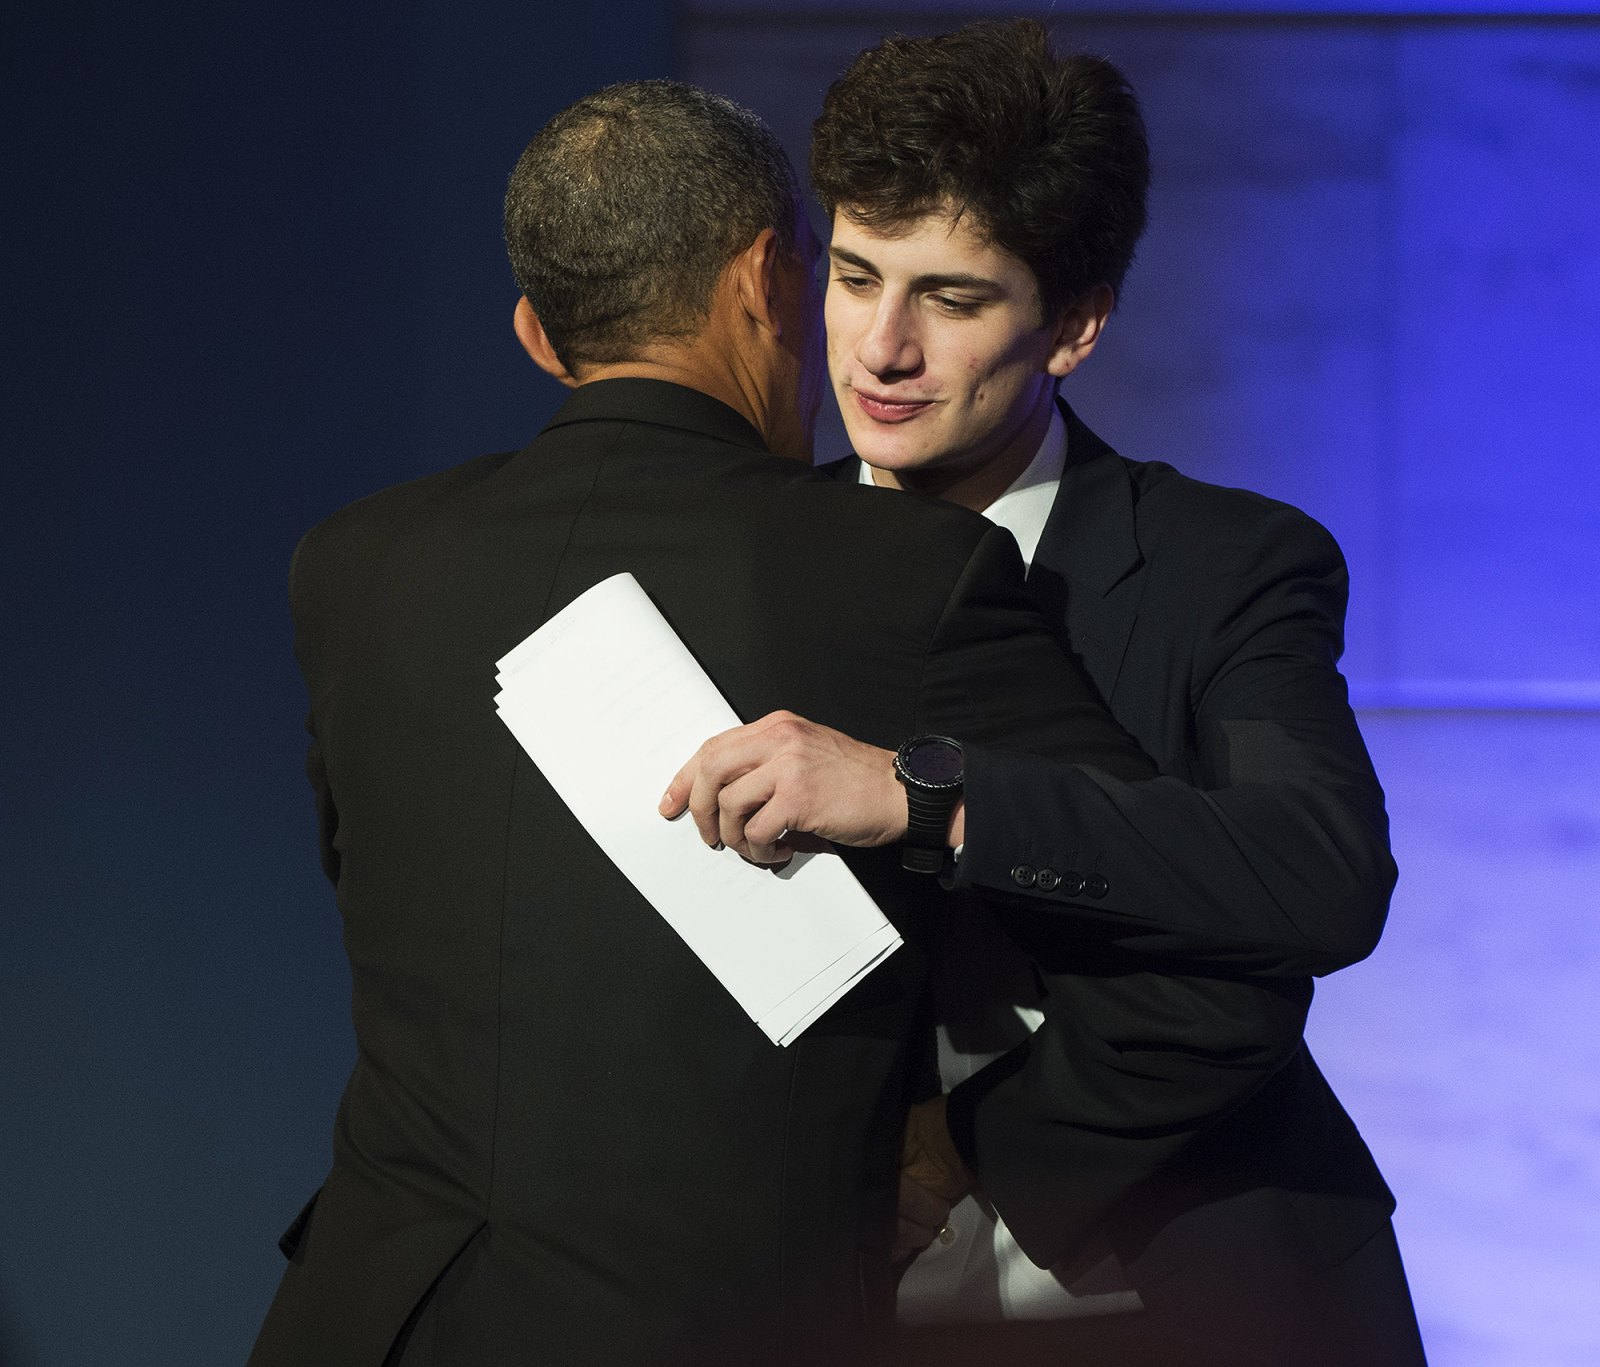 Jack Schlossberg 5 Things to Know About John F. Kennedy Grandson 2